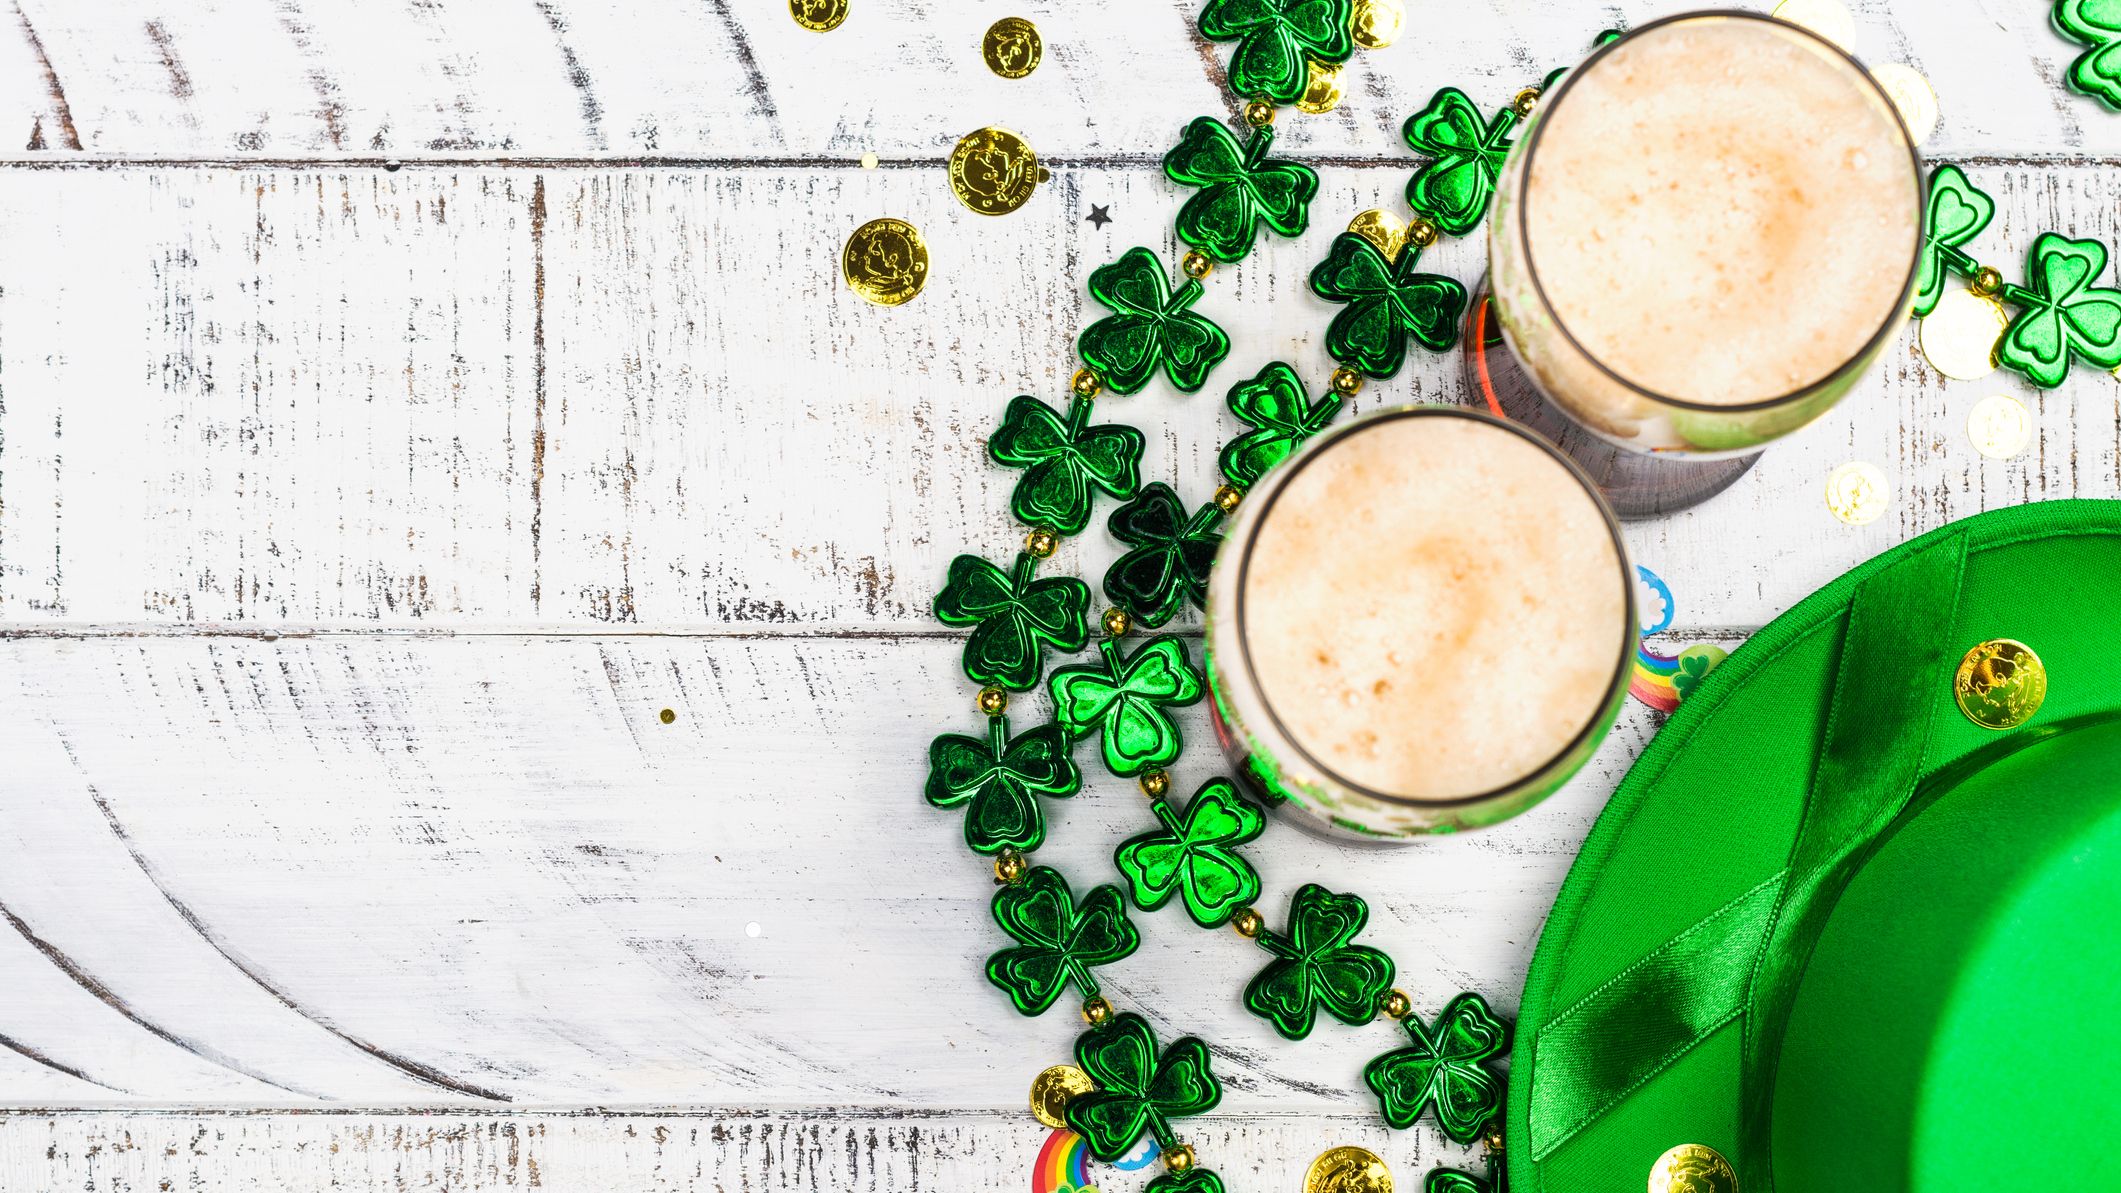 90 Best St. Patrick's Day Captions 2023: Lucky, Funny & Cute Ideas